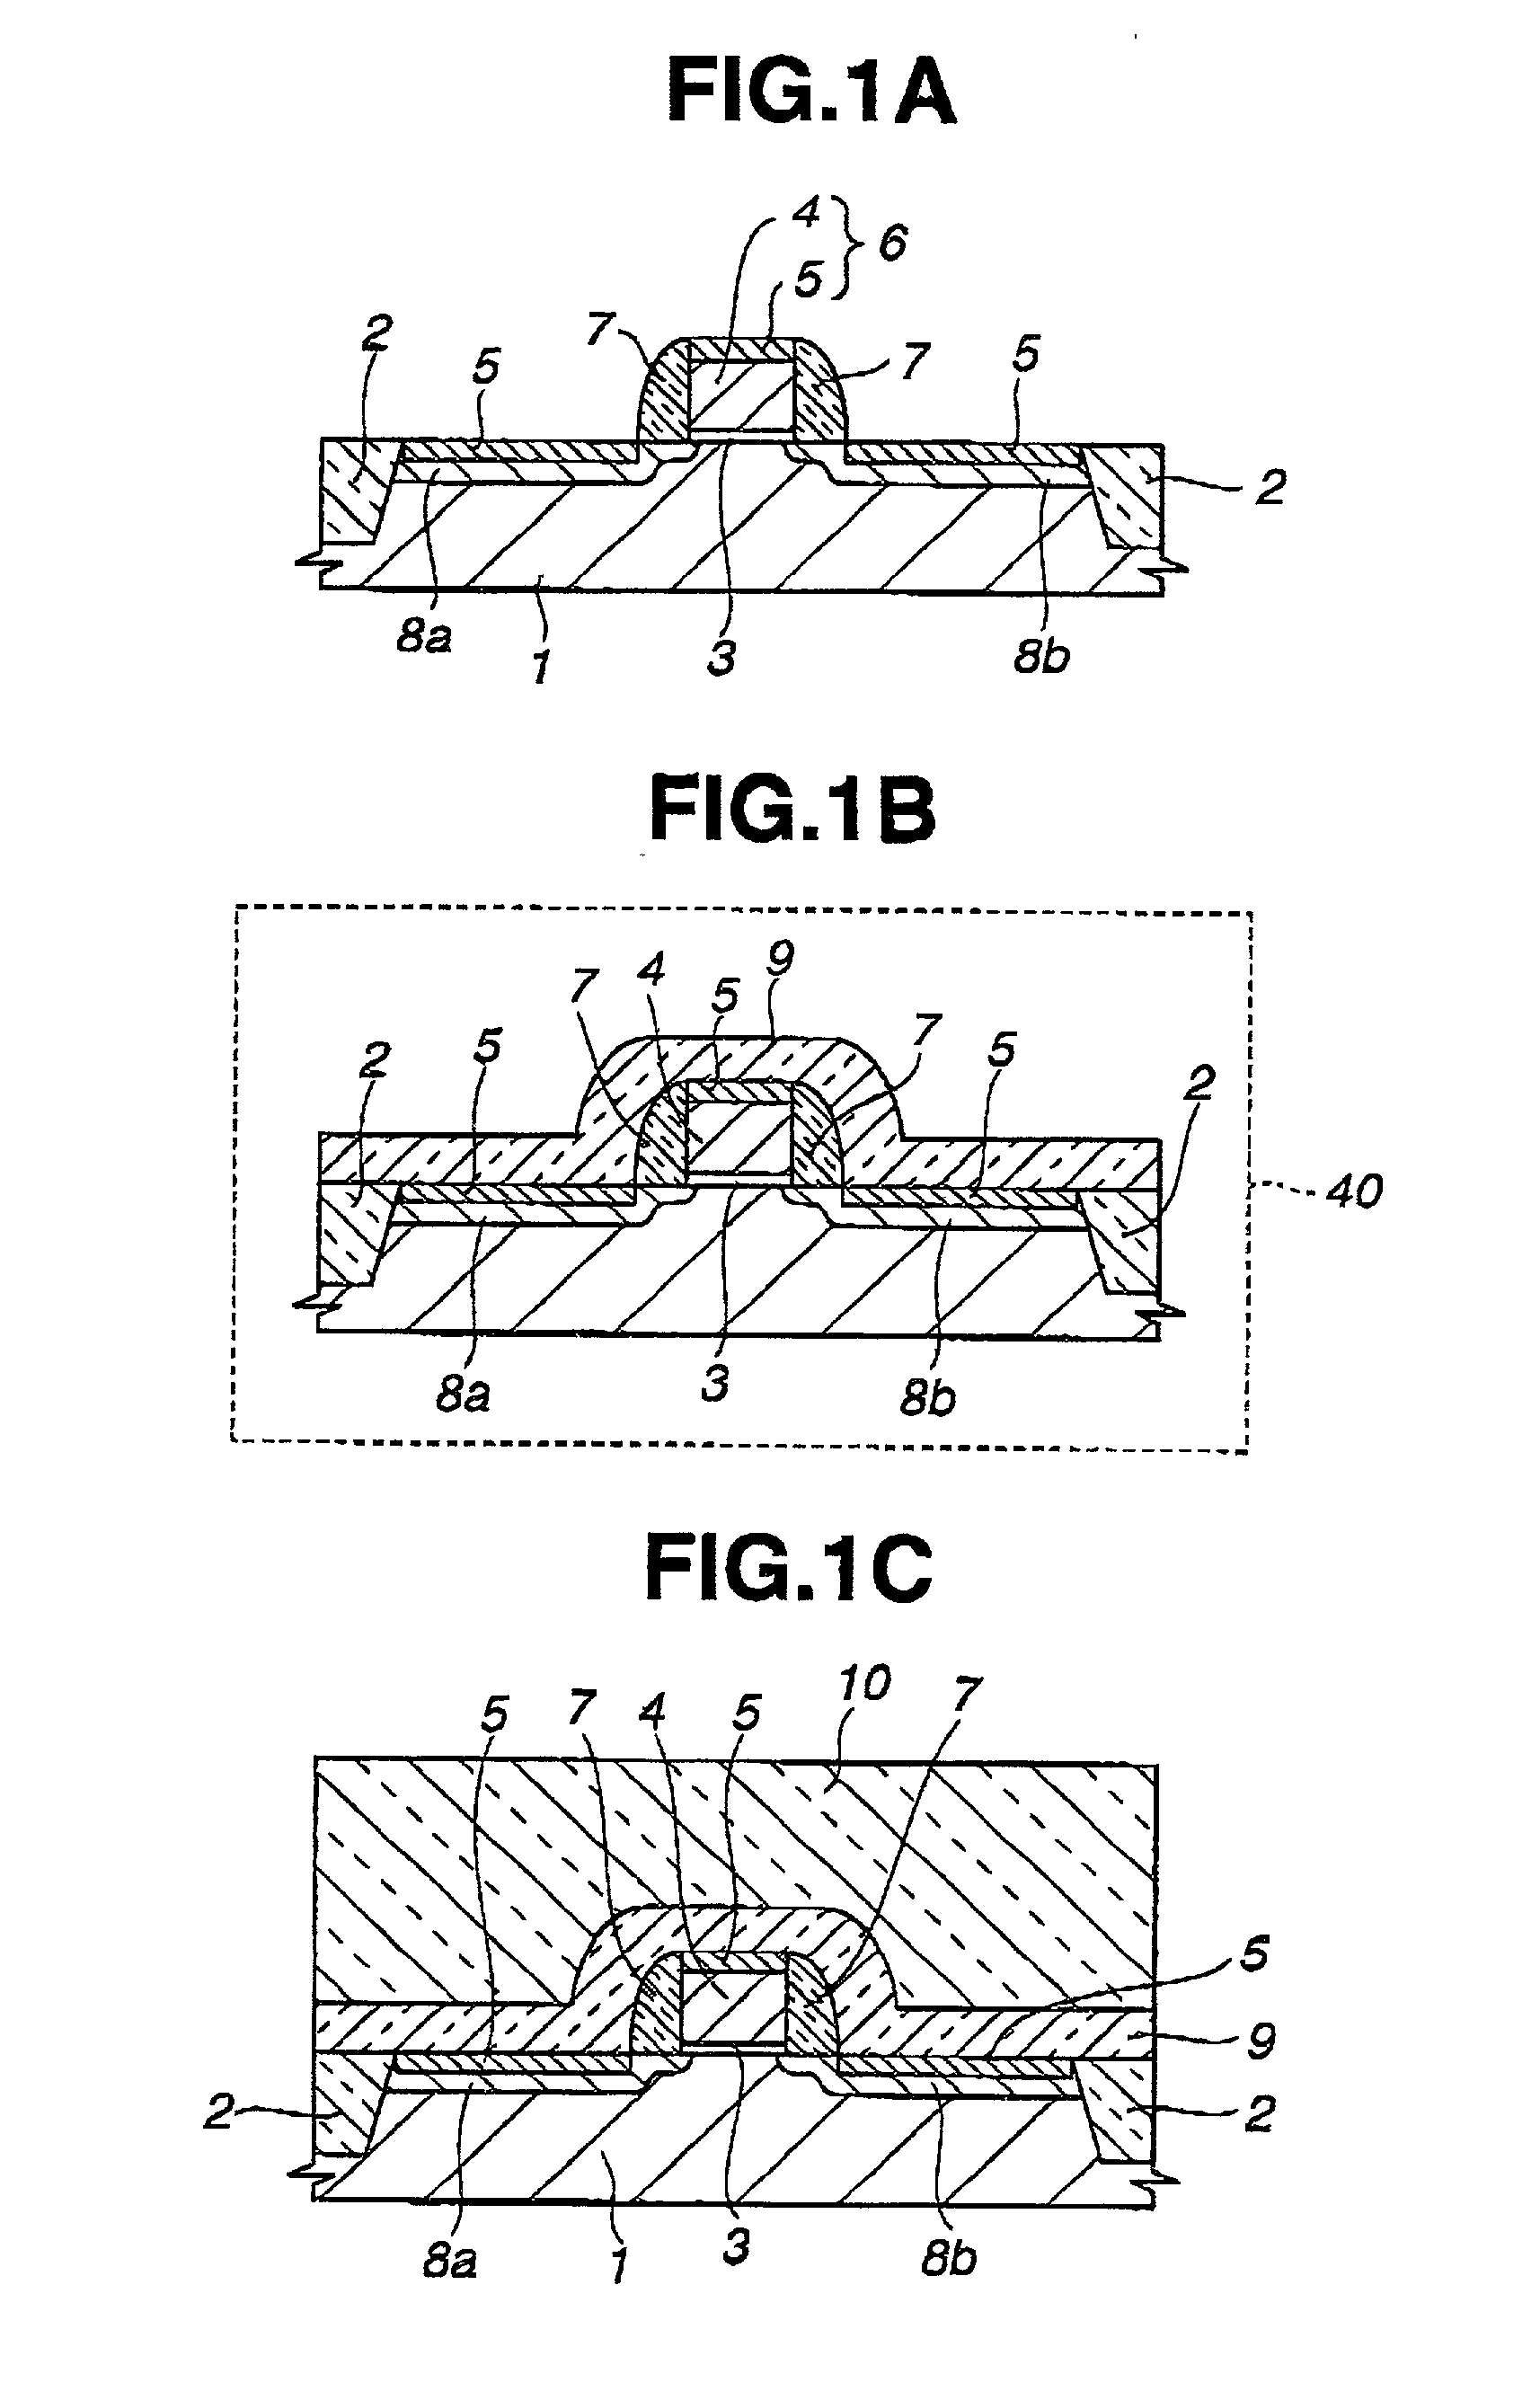 Enhanced deposition control in fabricating devices in a semiconductor wafer